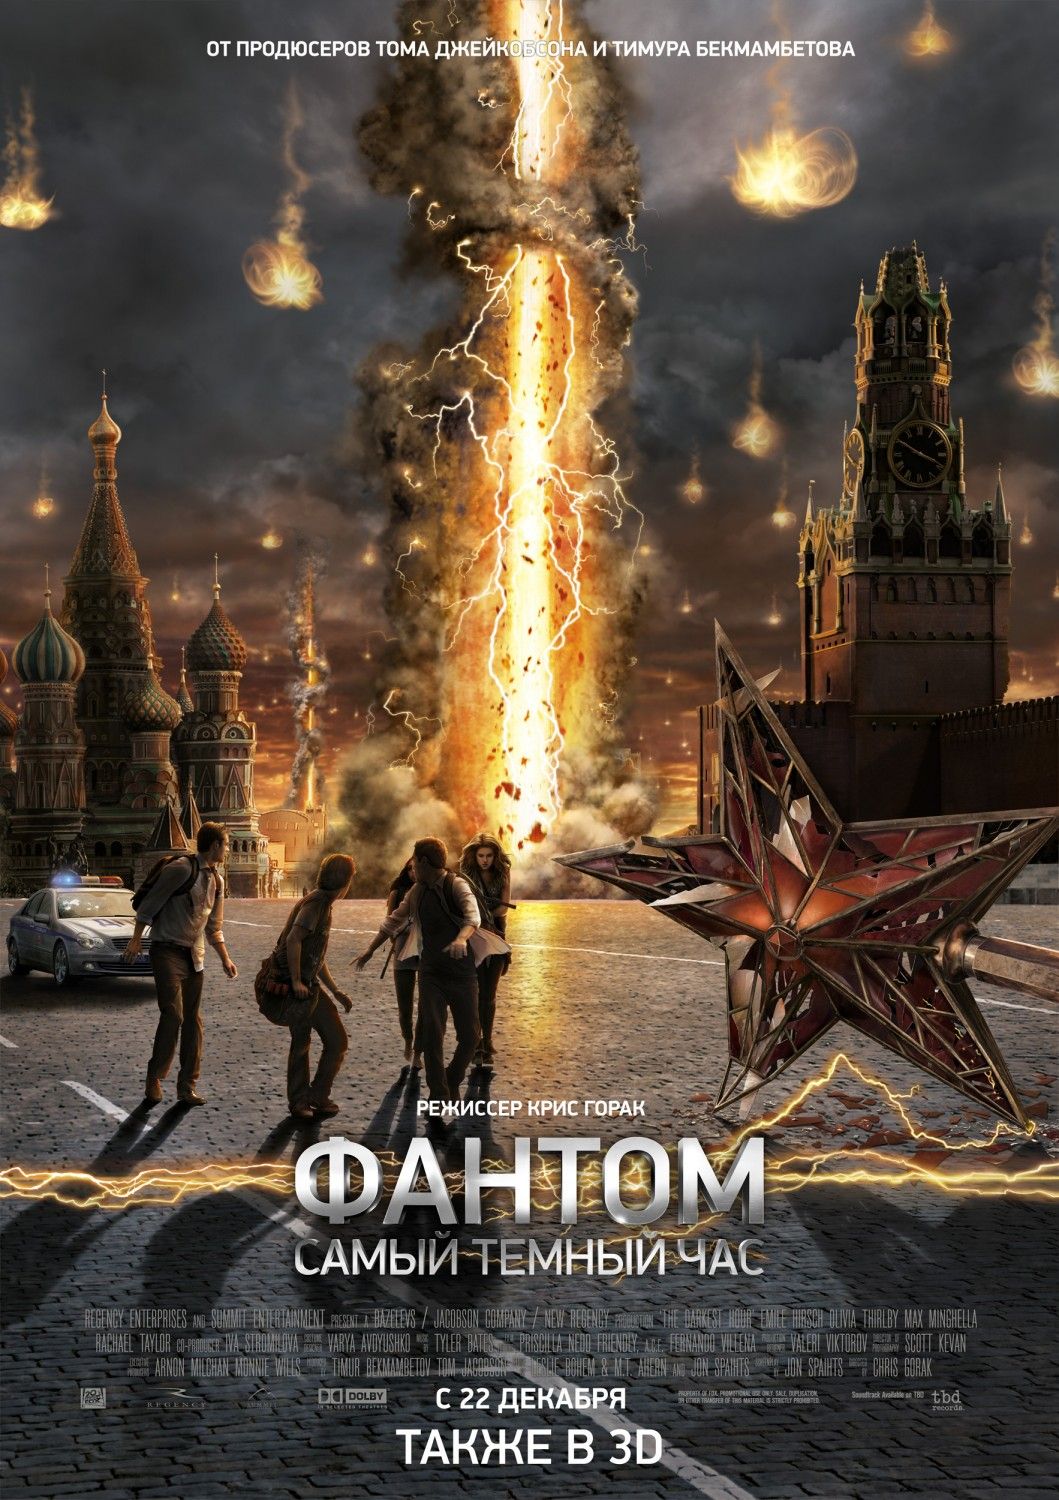 The Darkest Hour Russian Poster